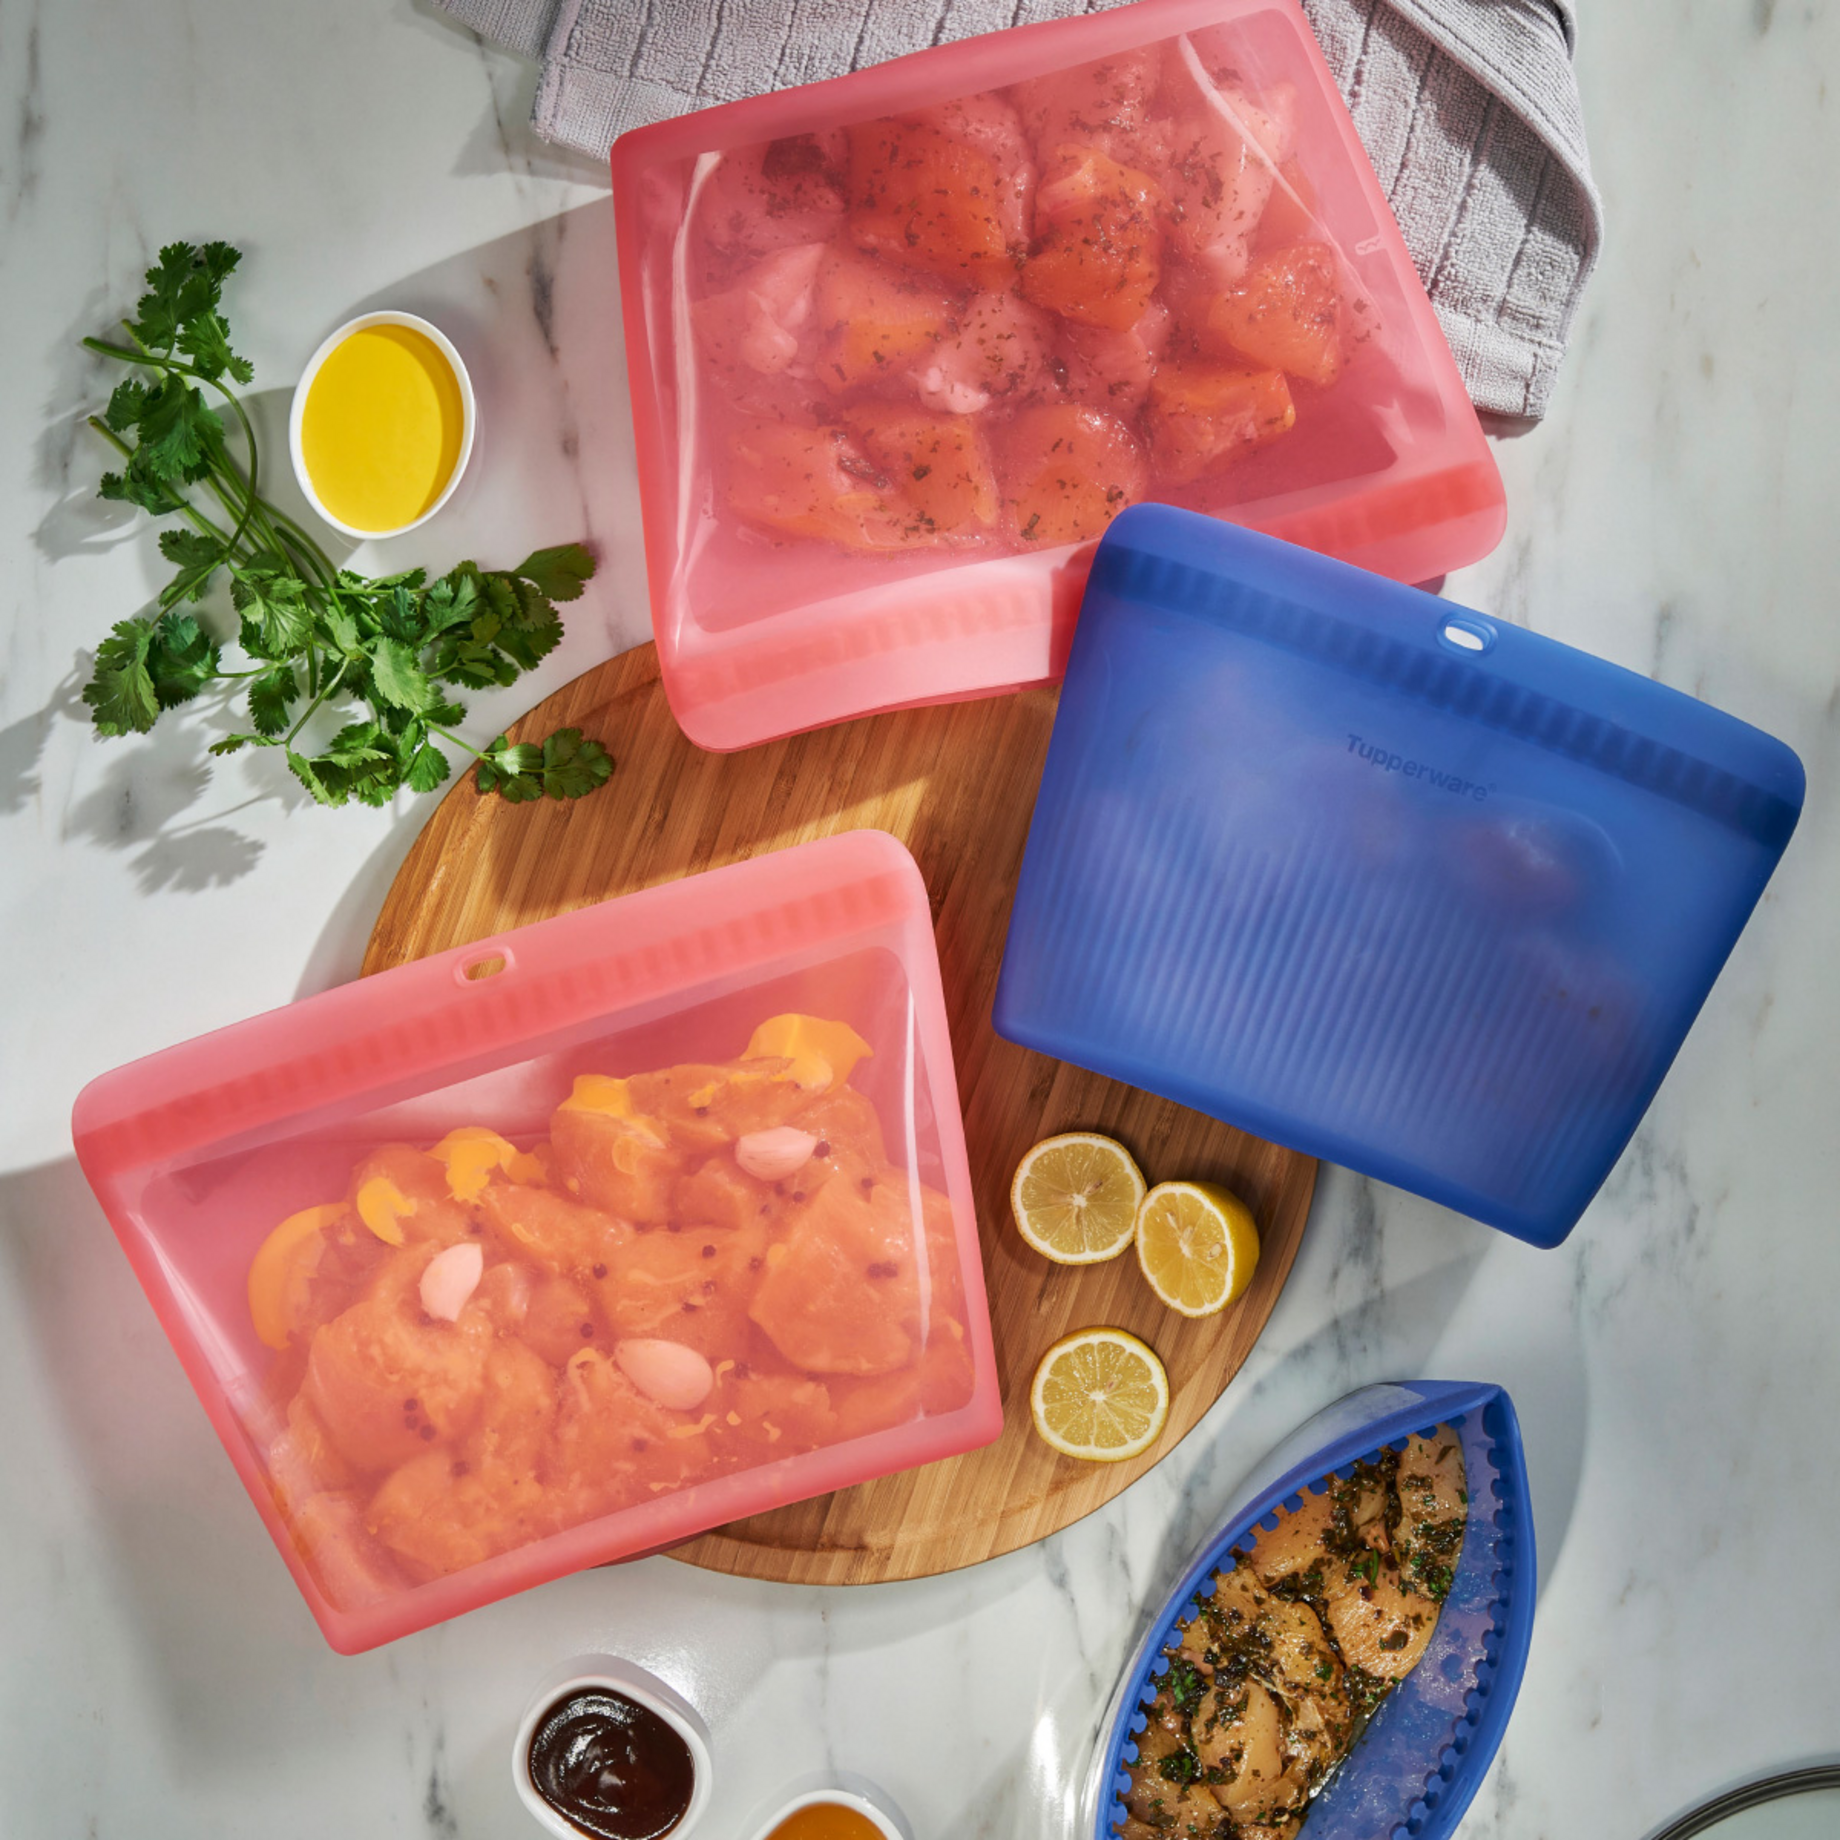 https://appng.tupperware.eu/service/appng/tupperware-products/rest/autoCrop/506513/1840/x